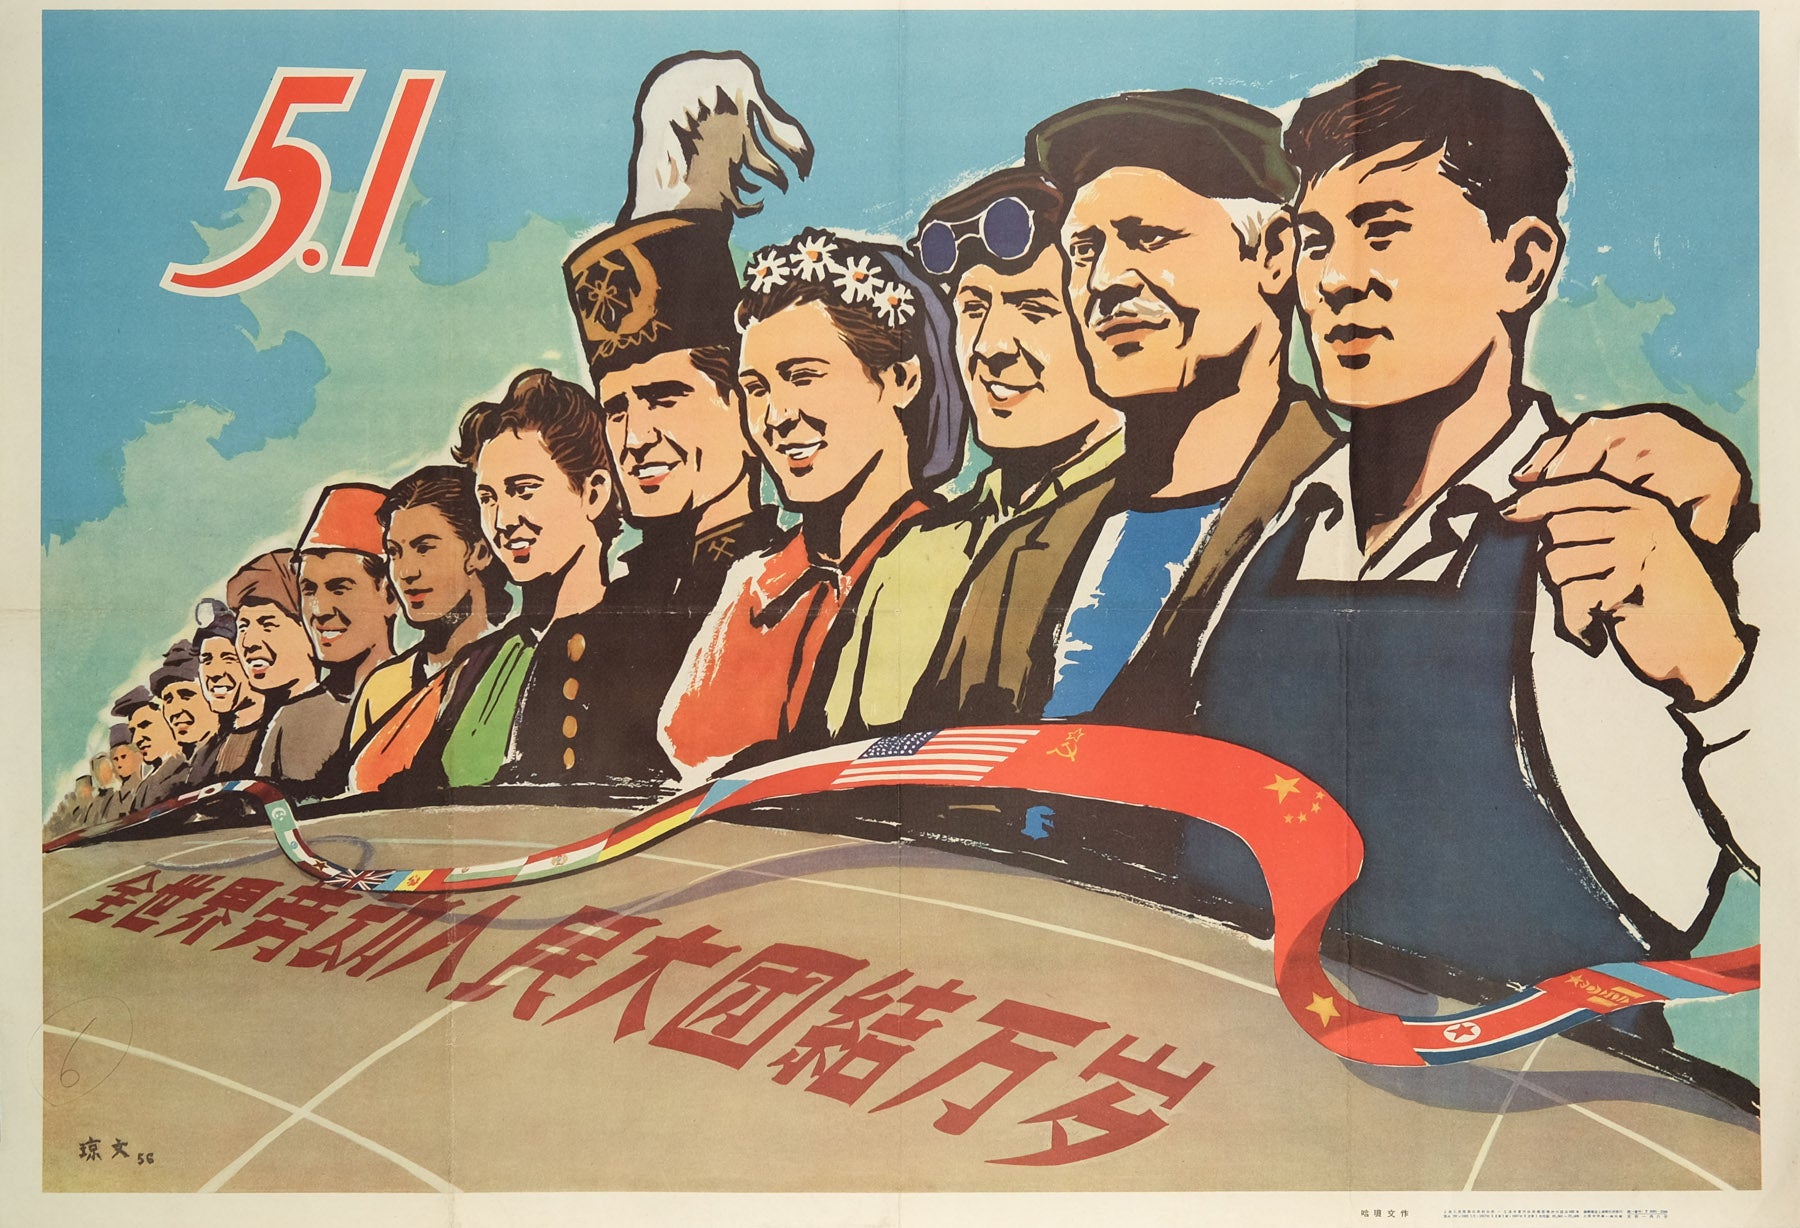 image of the original vintage 1957 Chinese communist propaganda poster by Ha Qiongwen titled Long live the unity of the workers of the world published by Shanghai People's Fine Art Publishing House